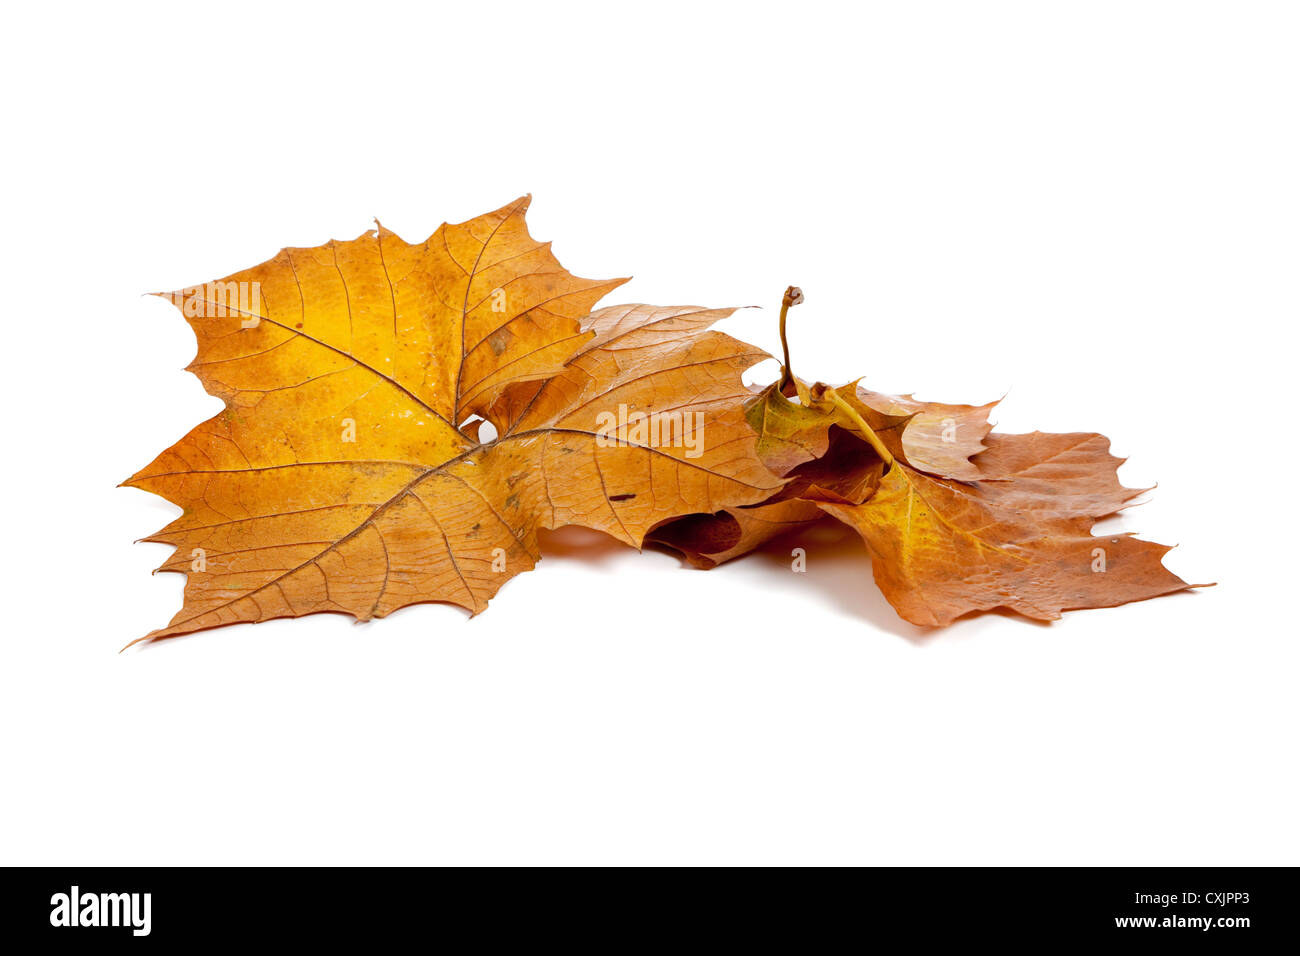 Golden autumn leaves on a white background Stock Photo